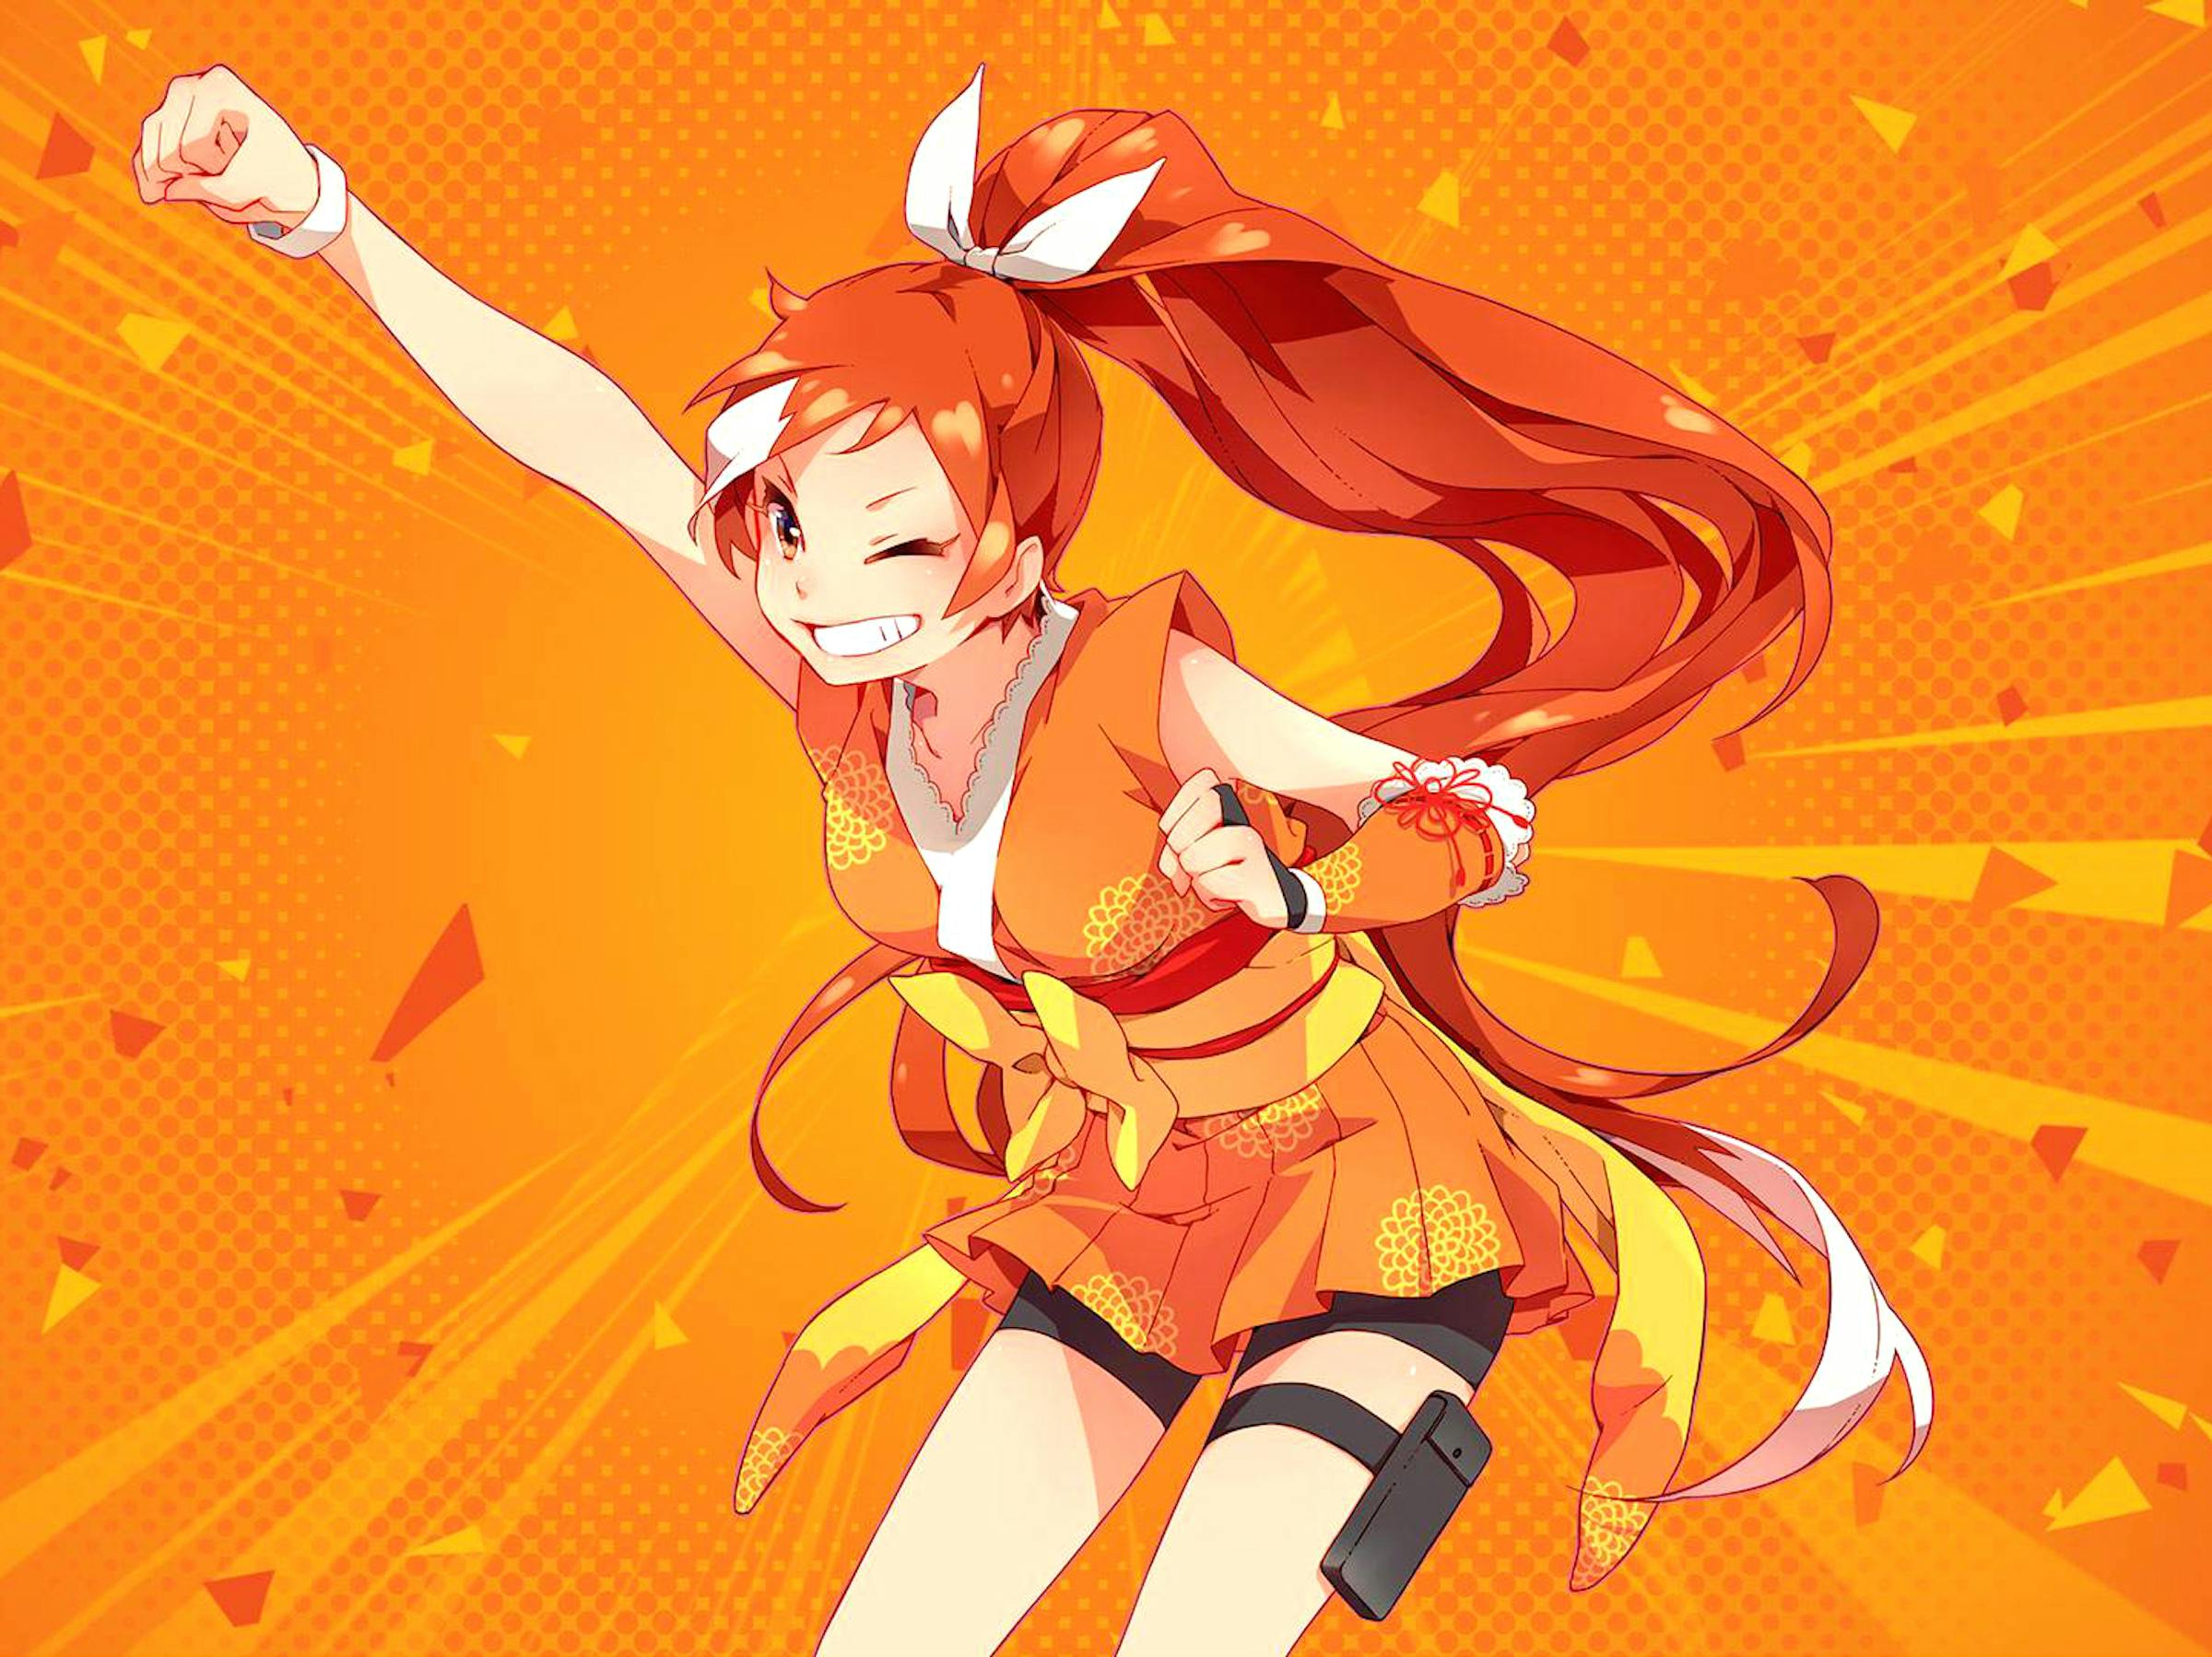 Crunchyroll Isn't Worried About Netflix and Amazon Focusing More on